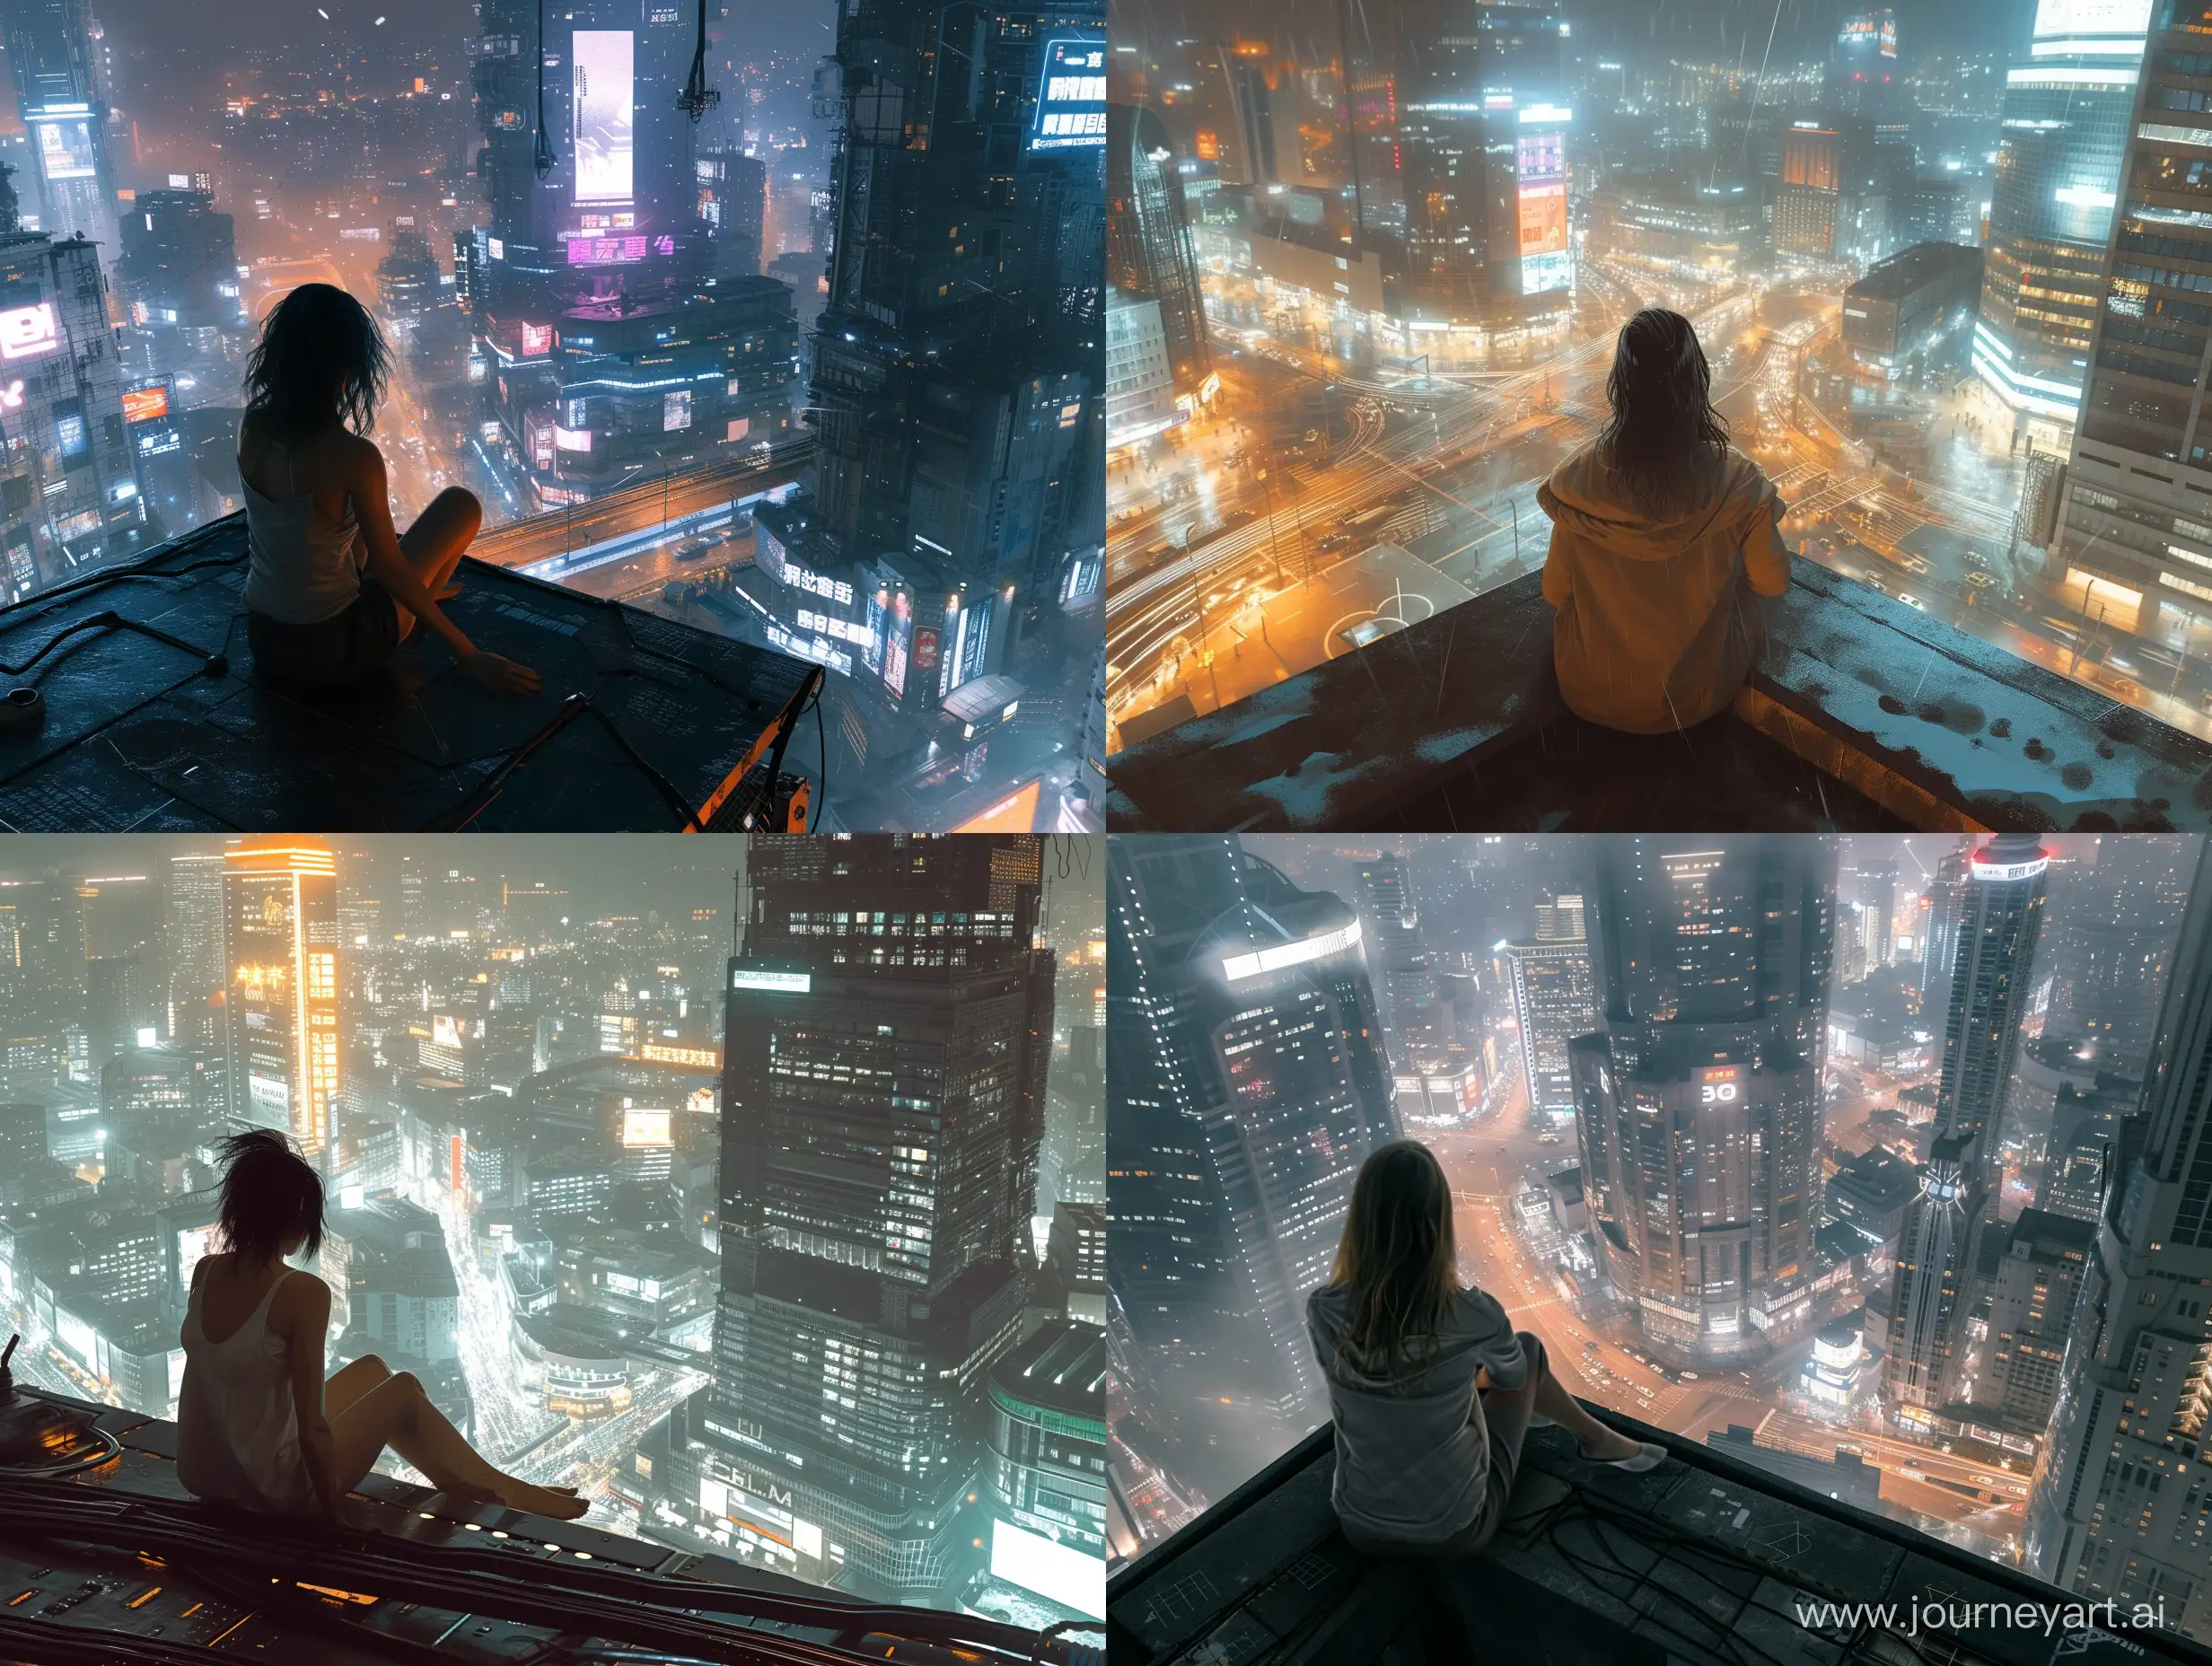 Nighttime-Serenity-Woman-Contemplating-Cityscape-from-Rooftop-in-Futuristic-Ambiance